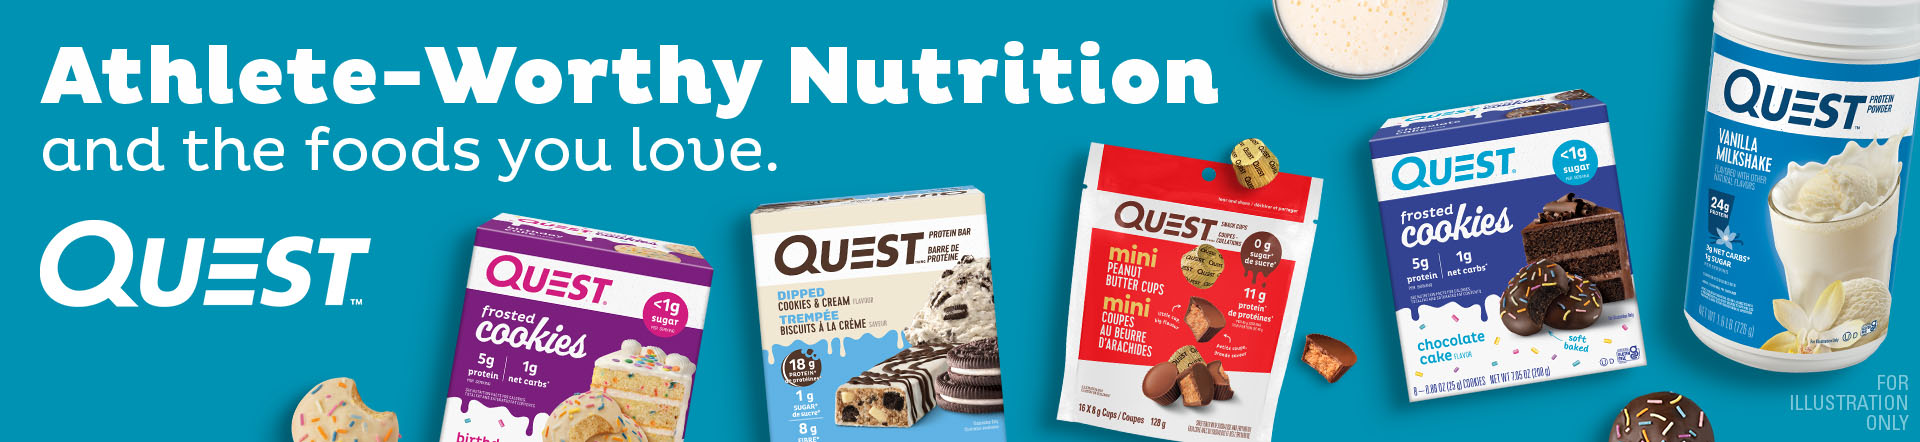 Quest Nutrition Protein Bar Cookie Tortilla Chips Crackers Protein All Natural